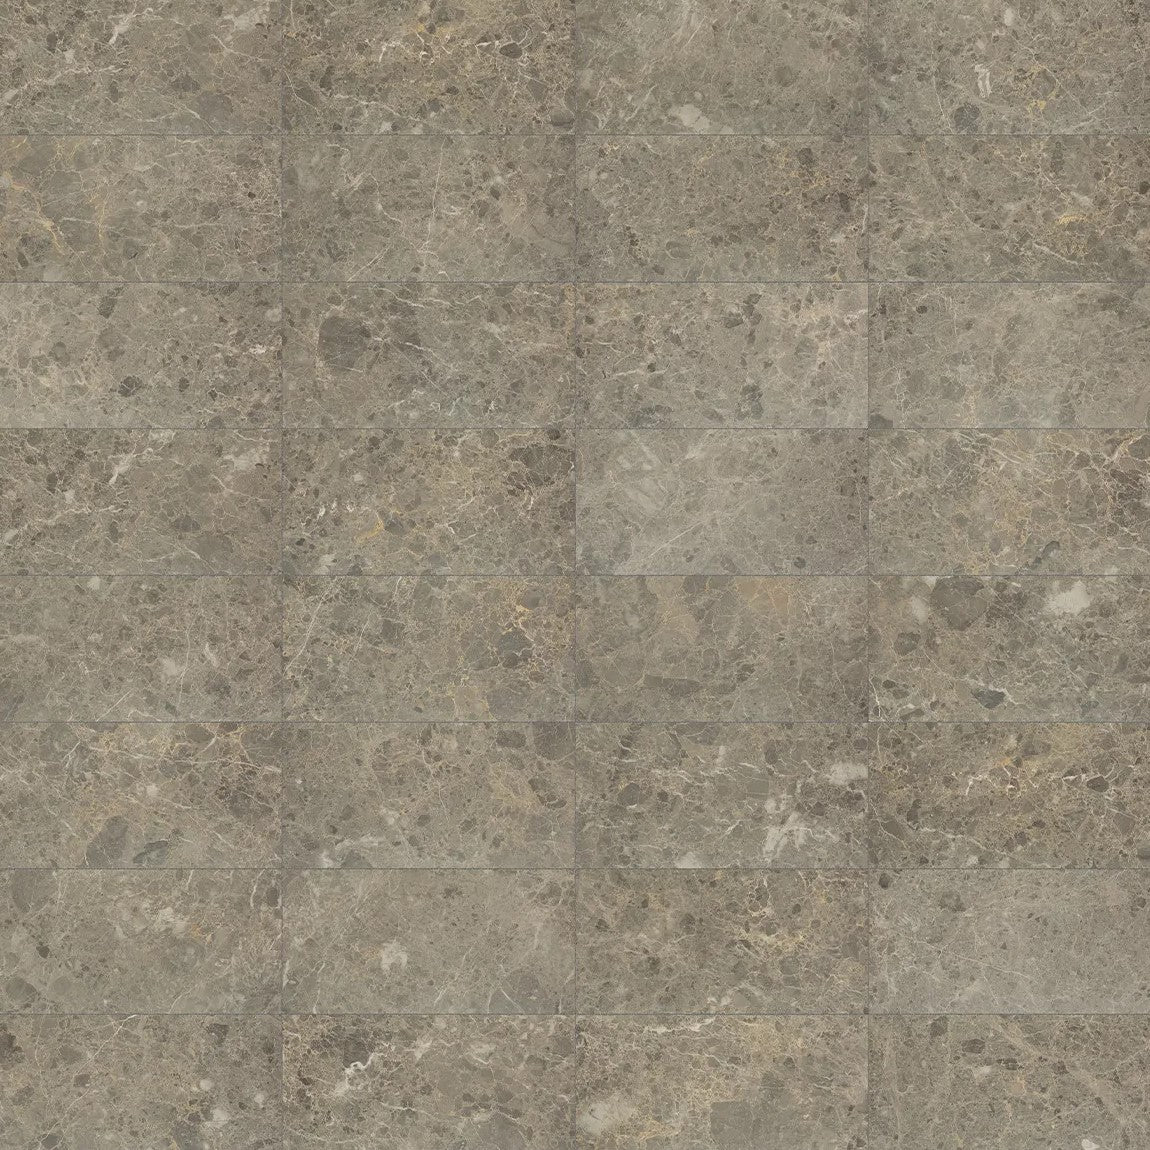 velutto ash marble tile variations